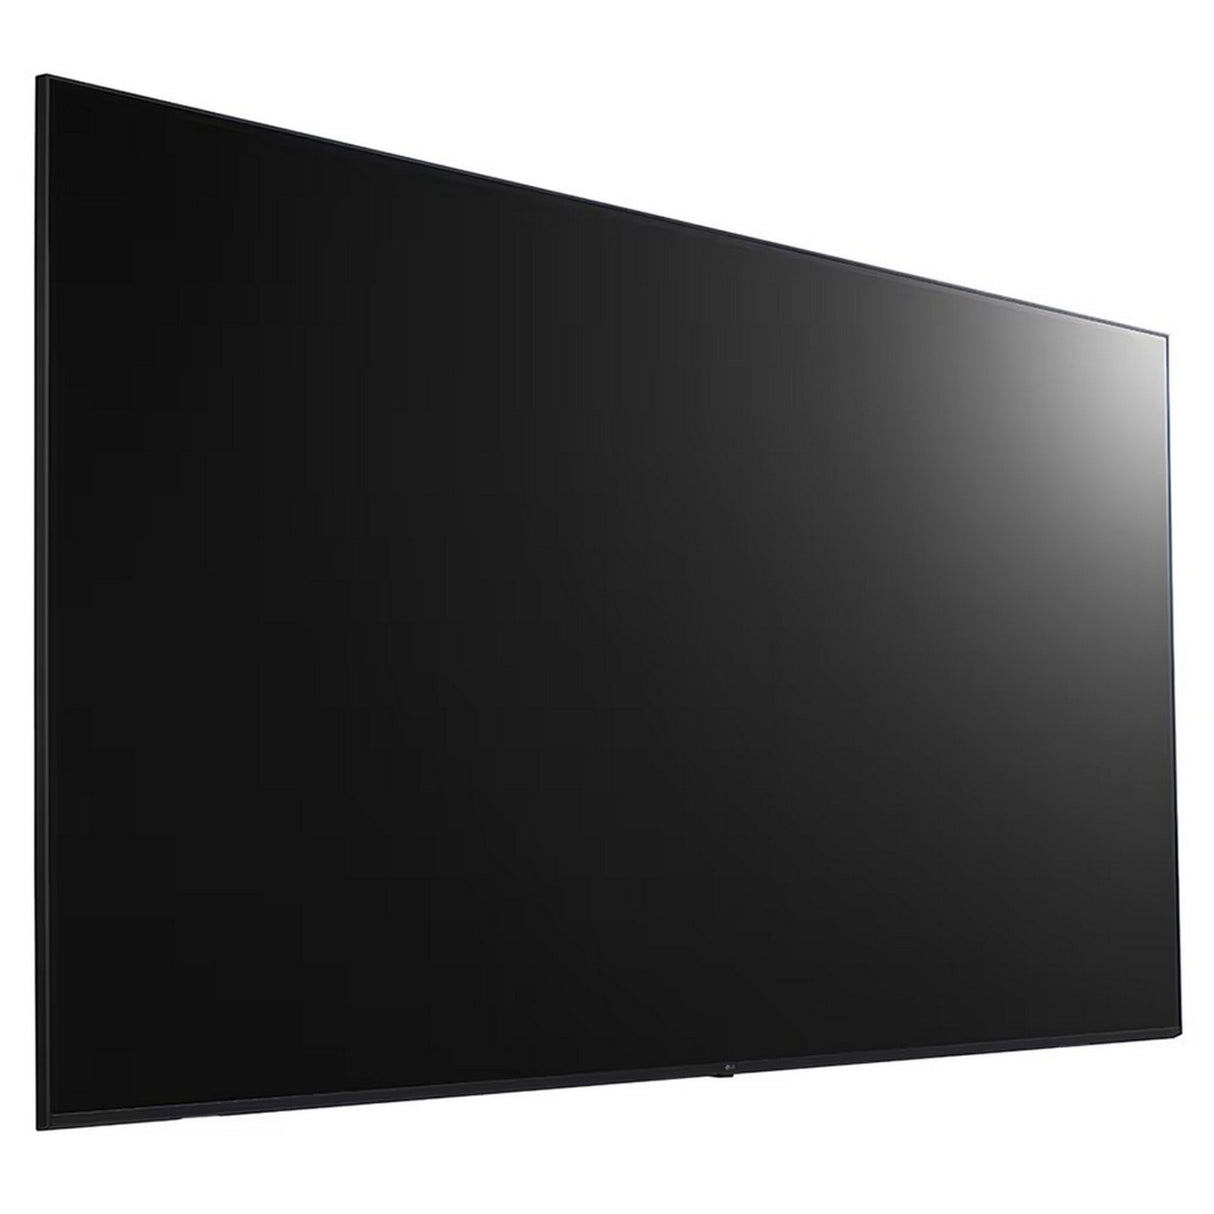 LG UL3J-B 86-Inch UHD Digital Signage with webOS 6.0 and Built-in Speakers